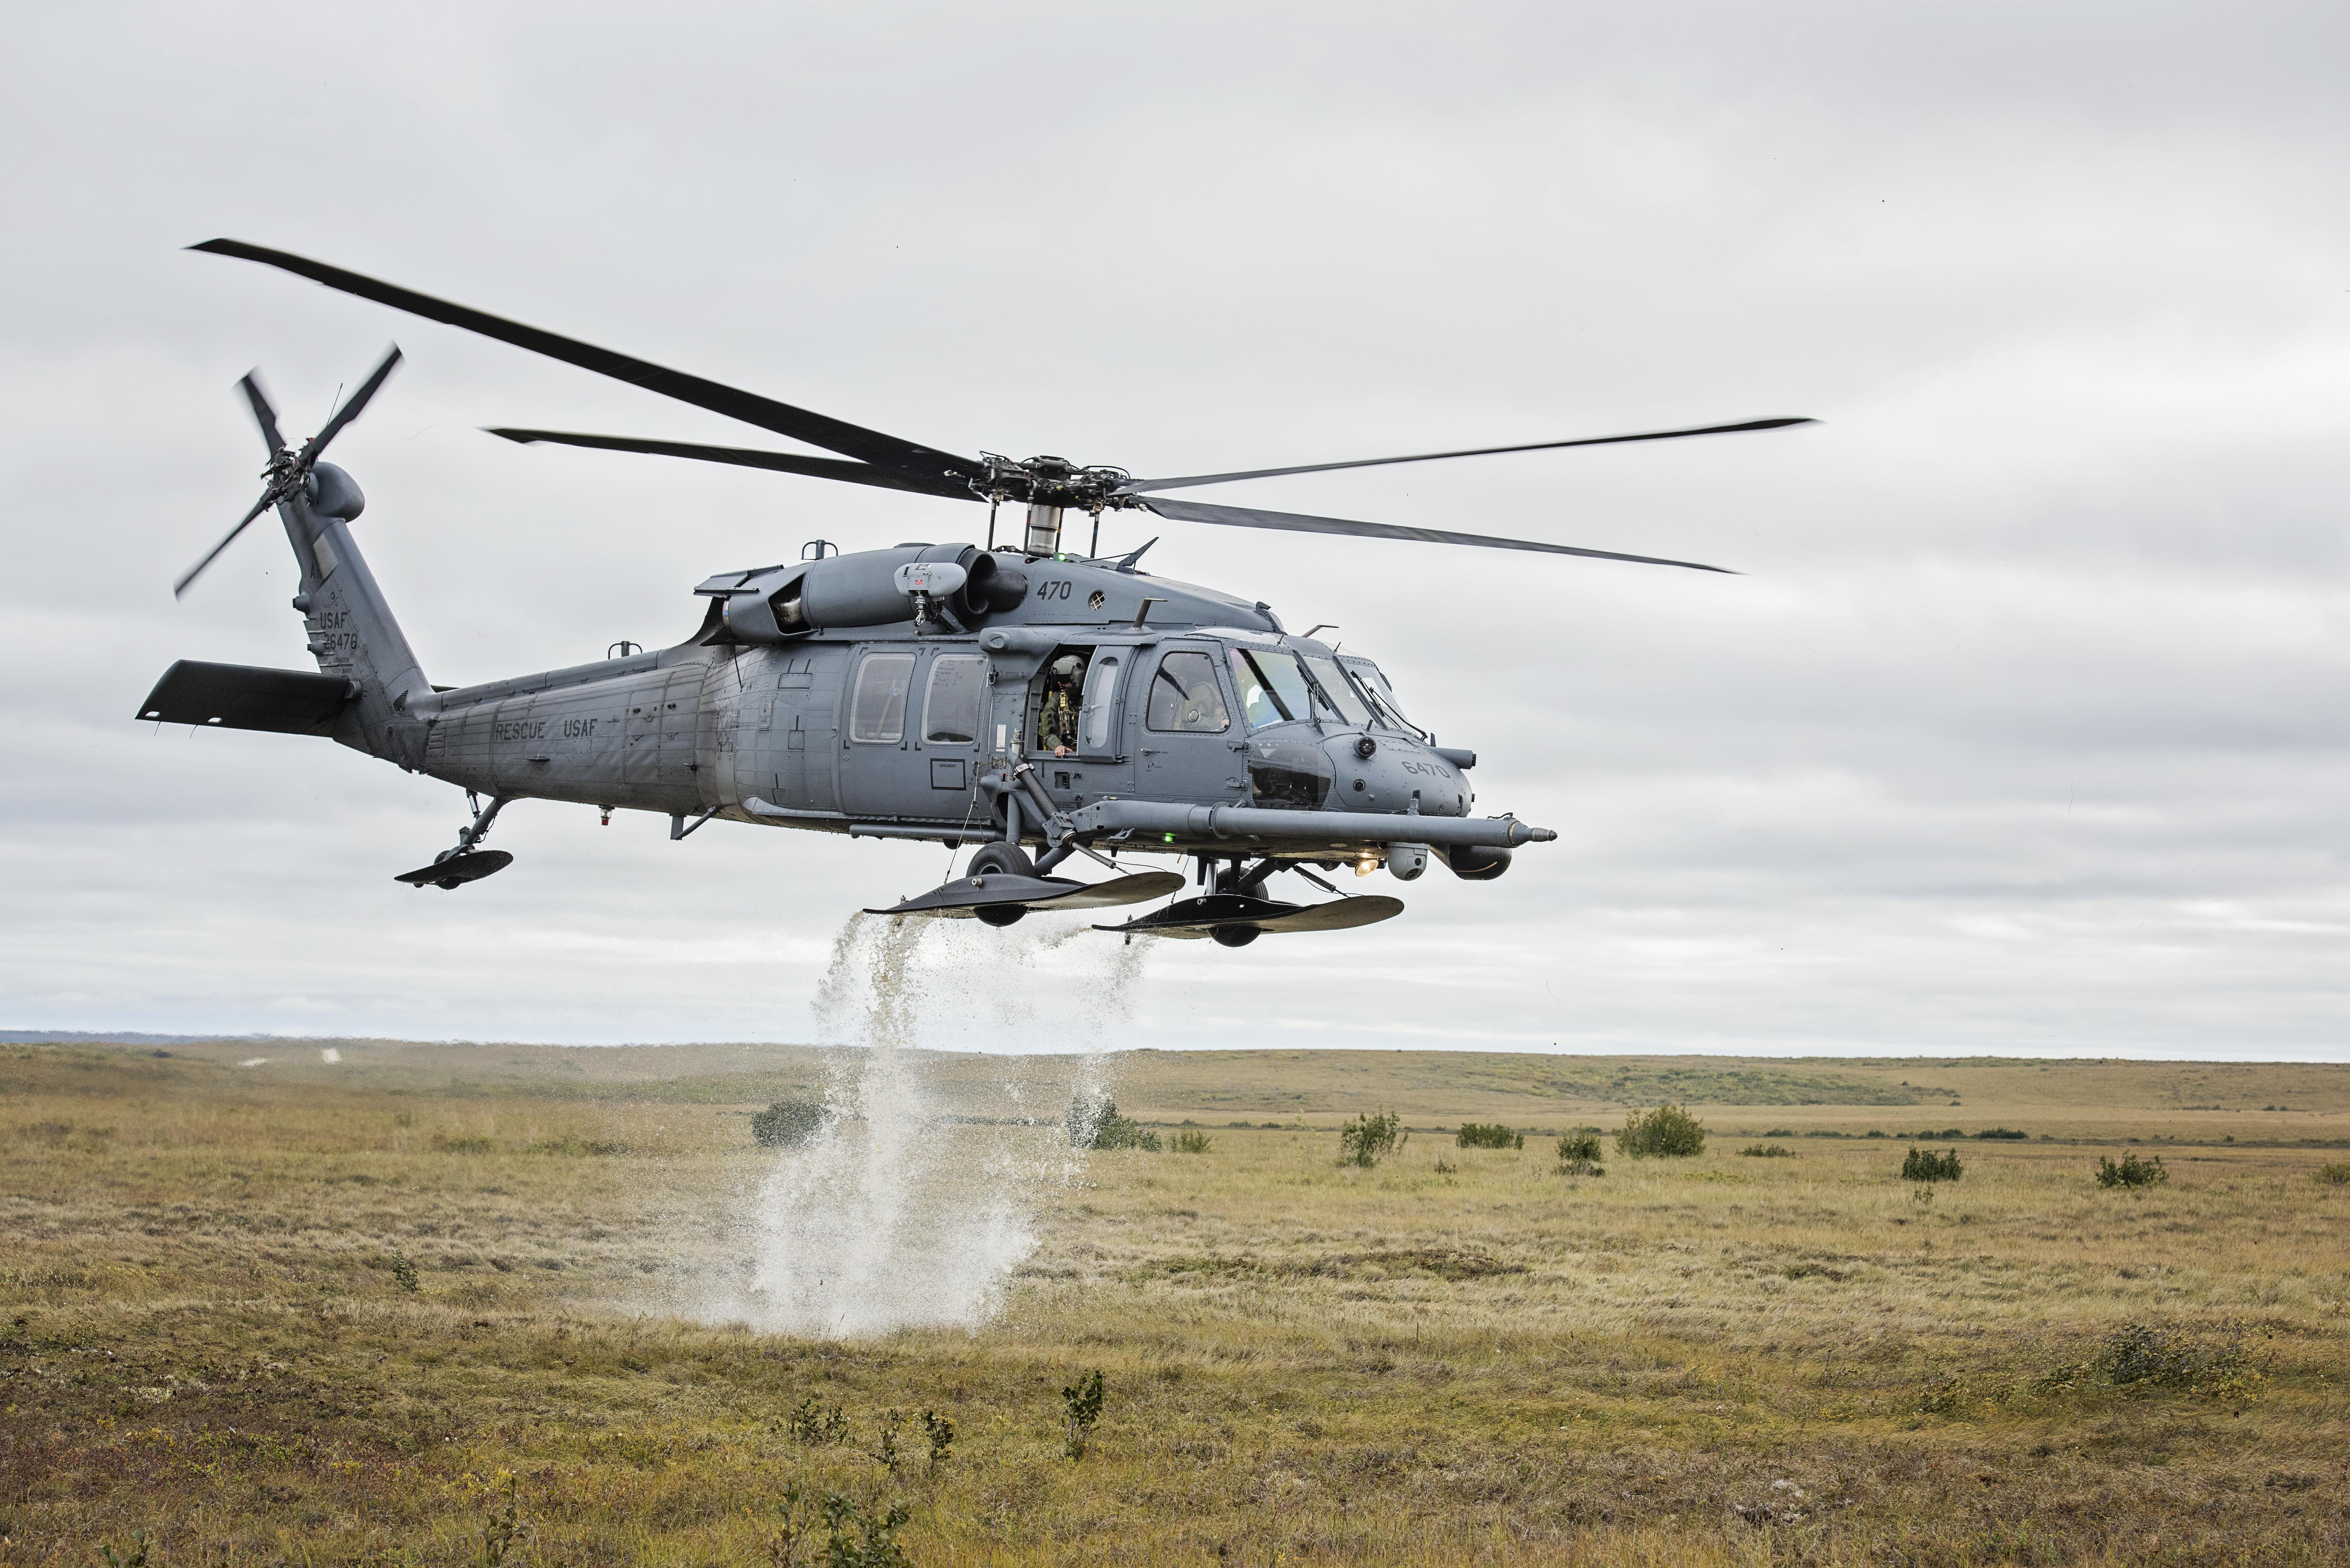 Military Helicopters, Sikorsky HH-60 Pave Hawk, Aircraft